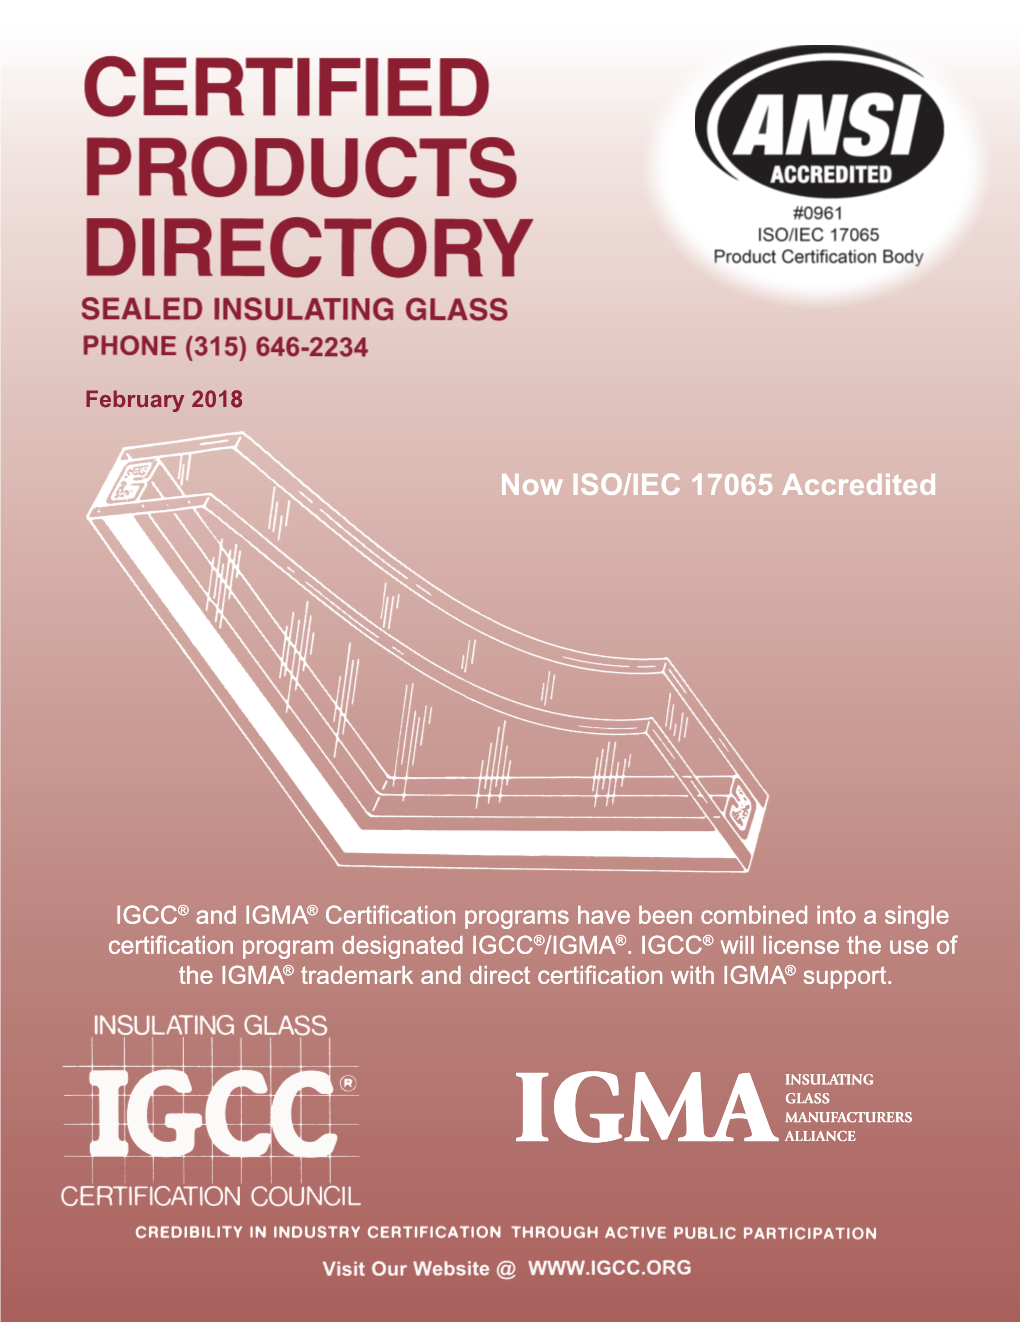 February 2018 Certified Products Directory